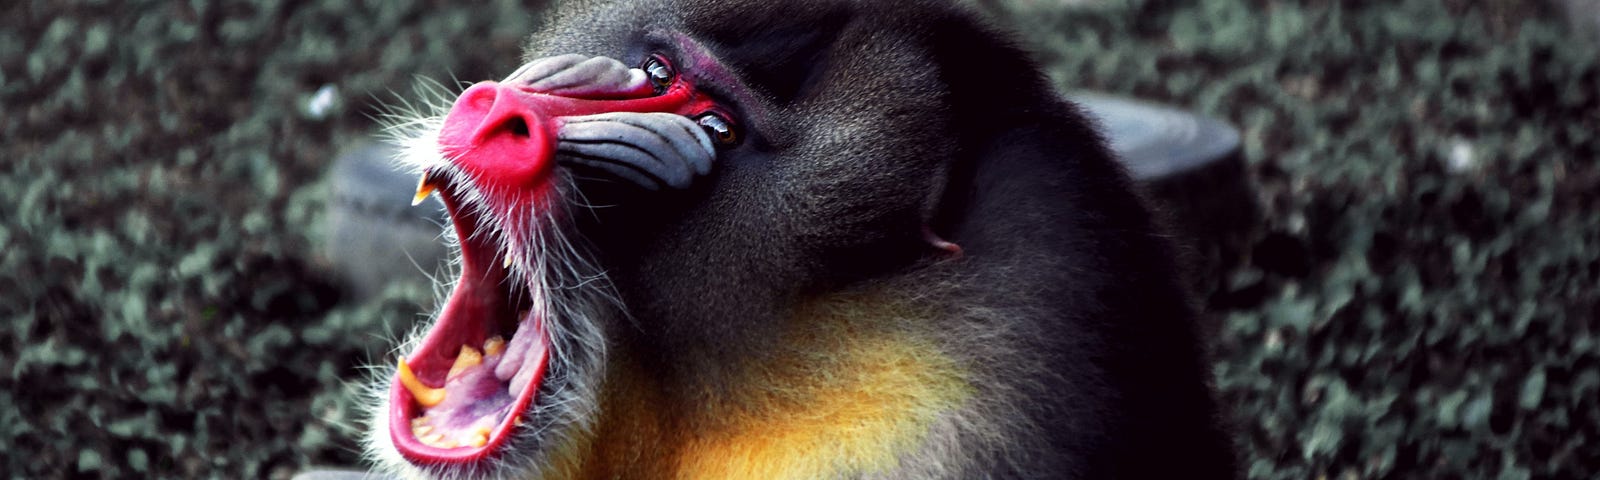 Baboon with fangs bared.